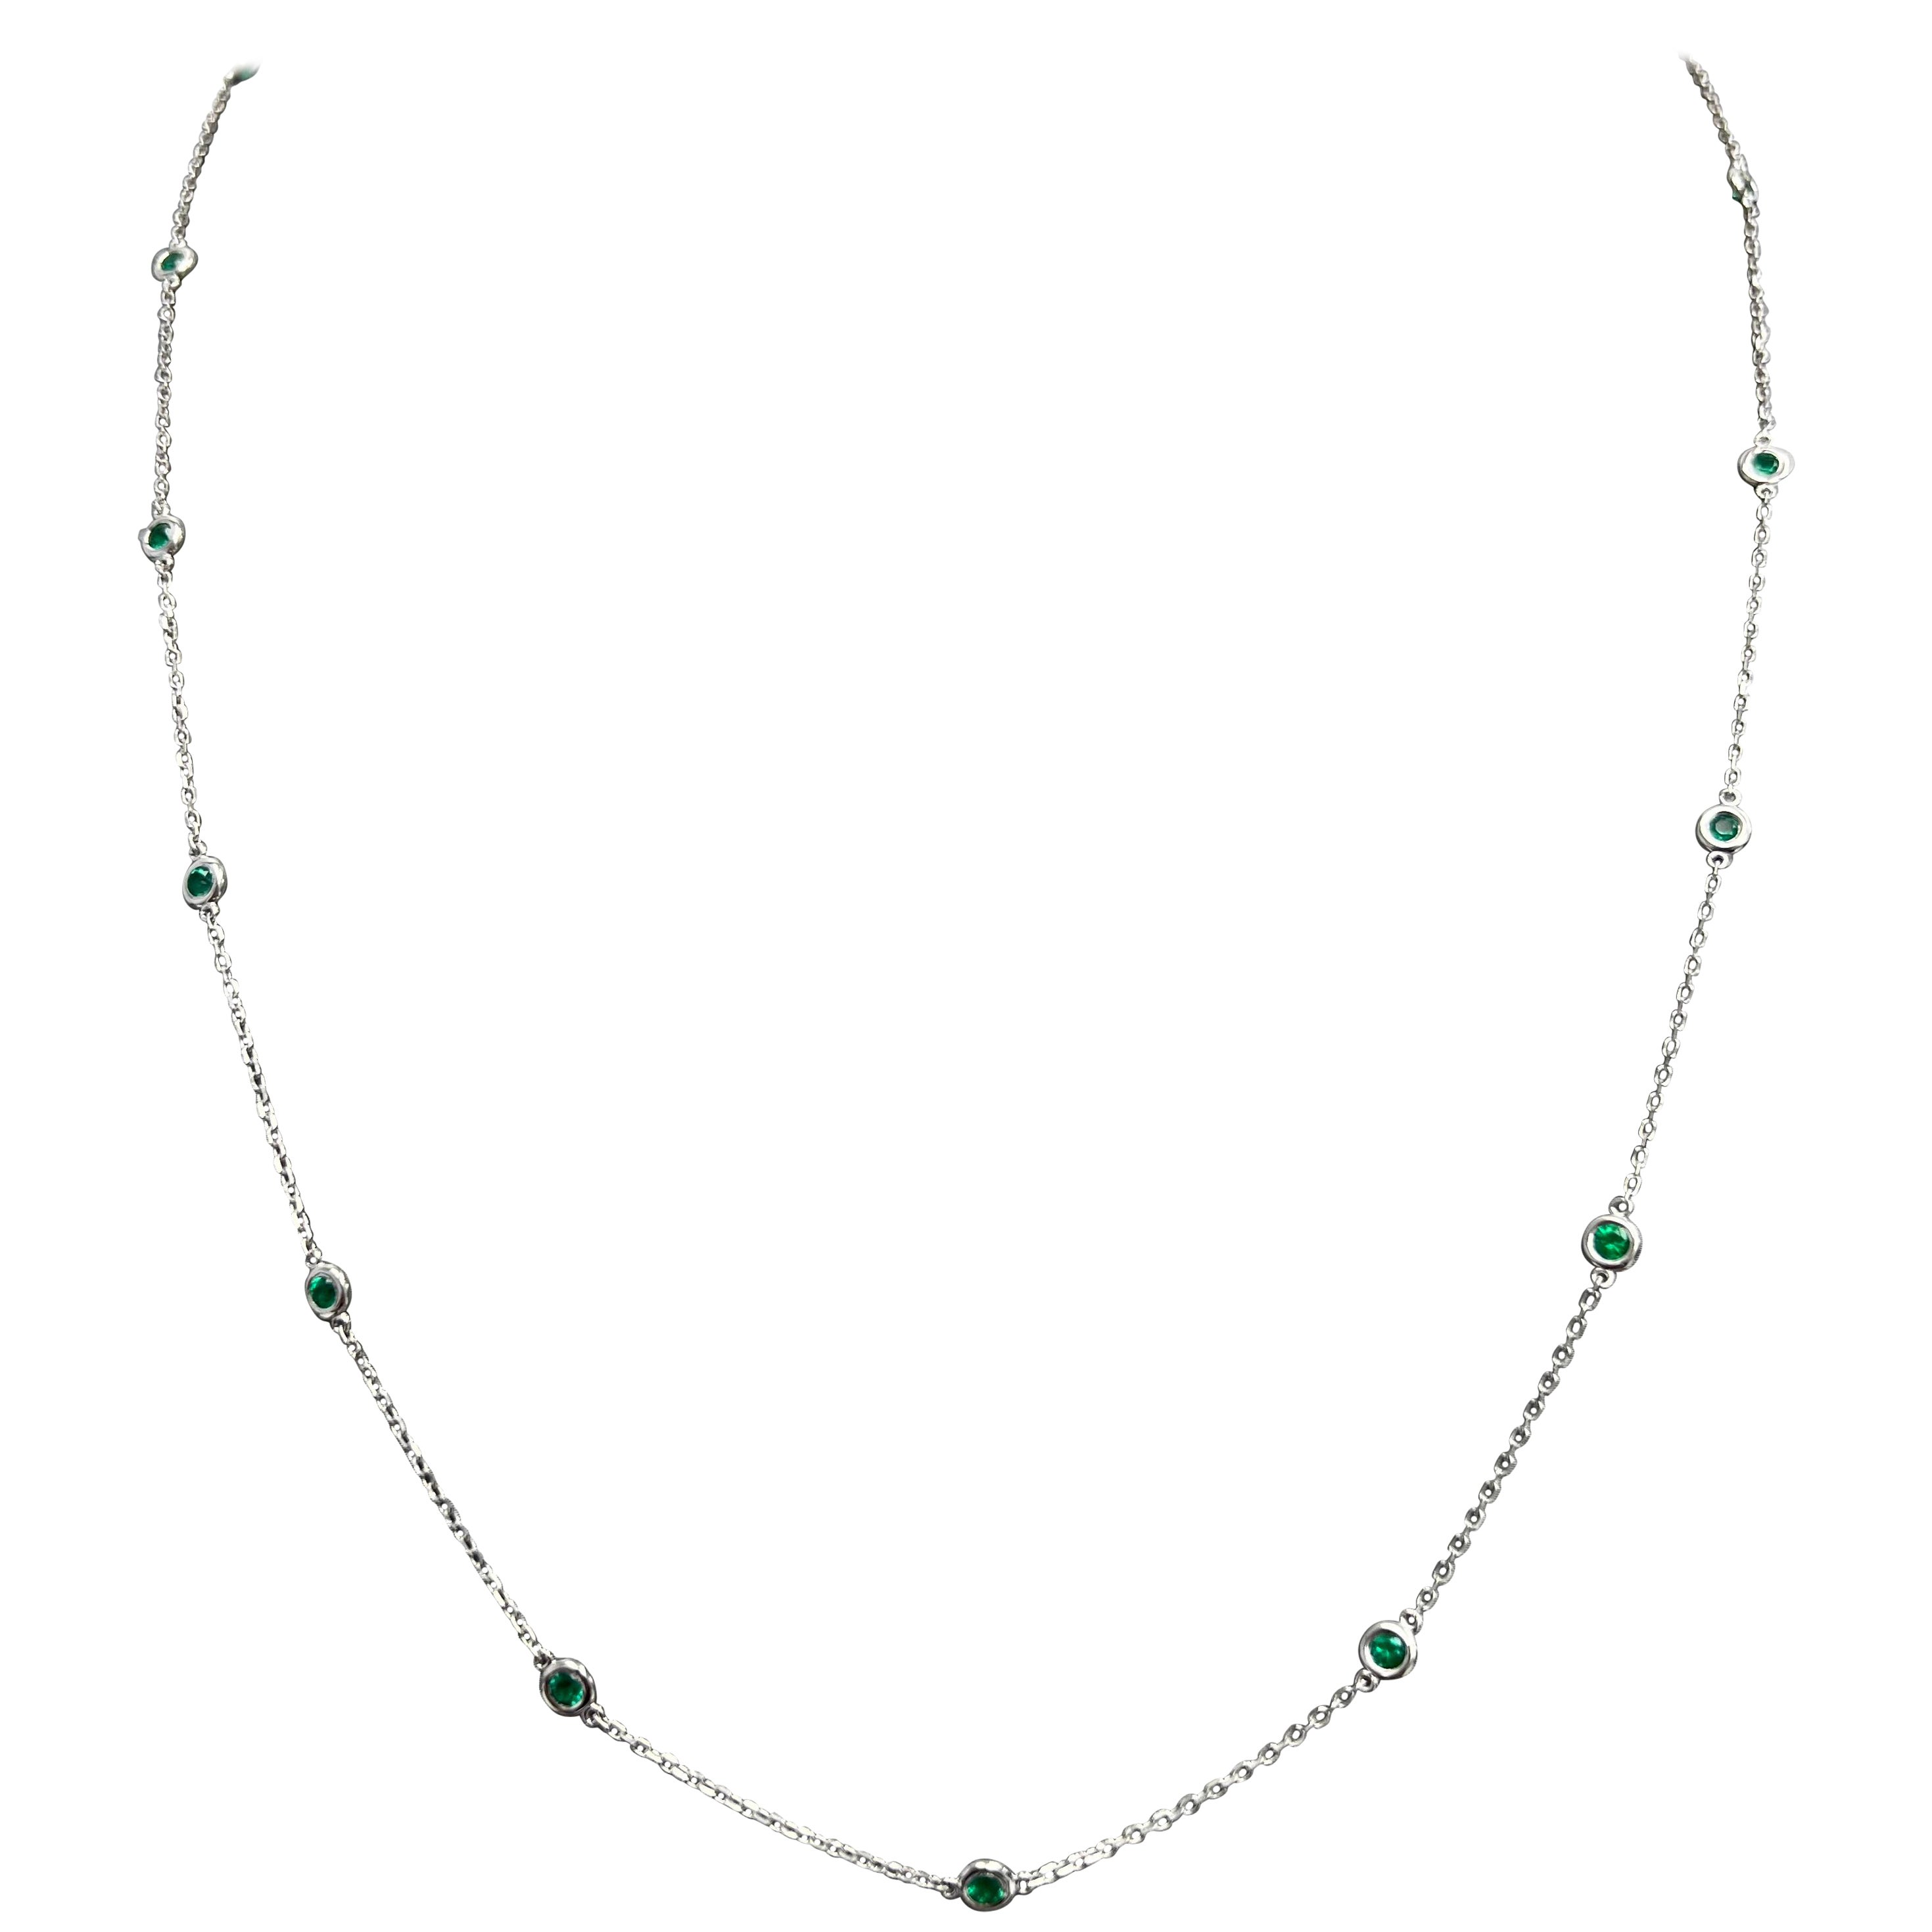 Diamonds by The Yard Chain Necklace in 14k White with Natural Emerald Gem-stones For Sale